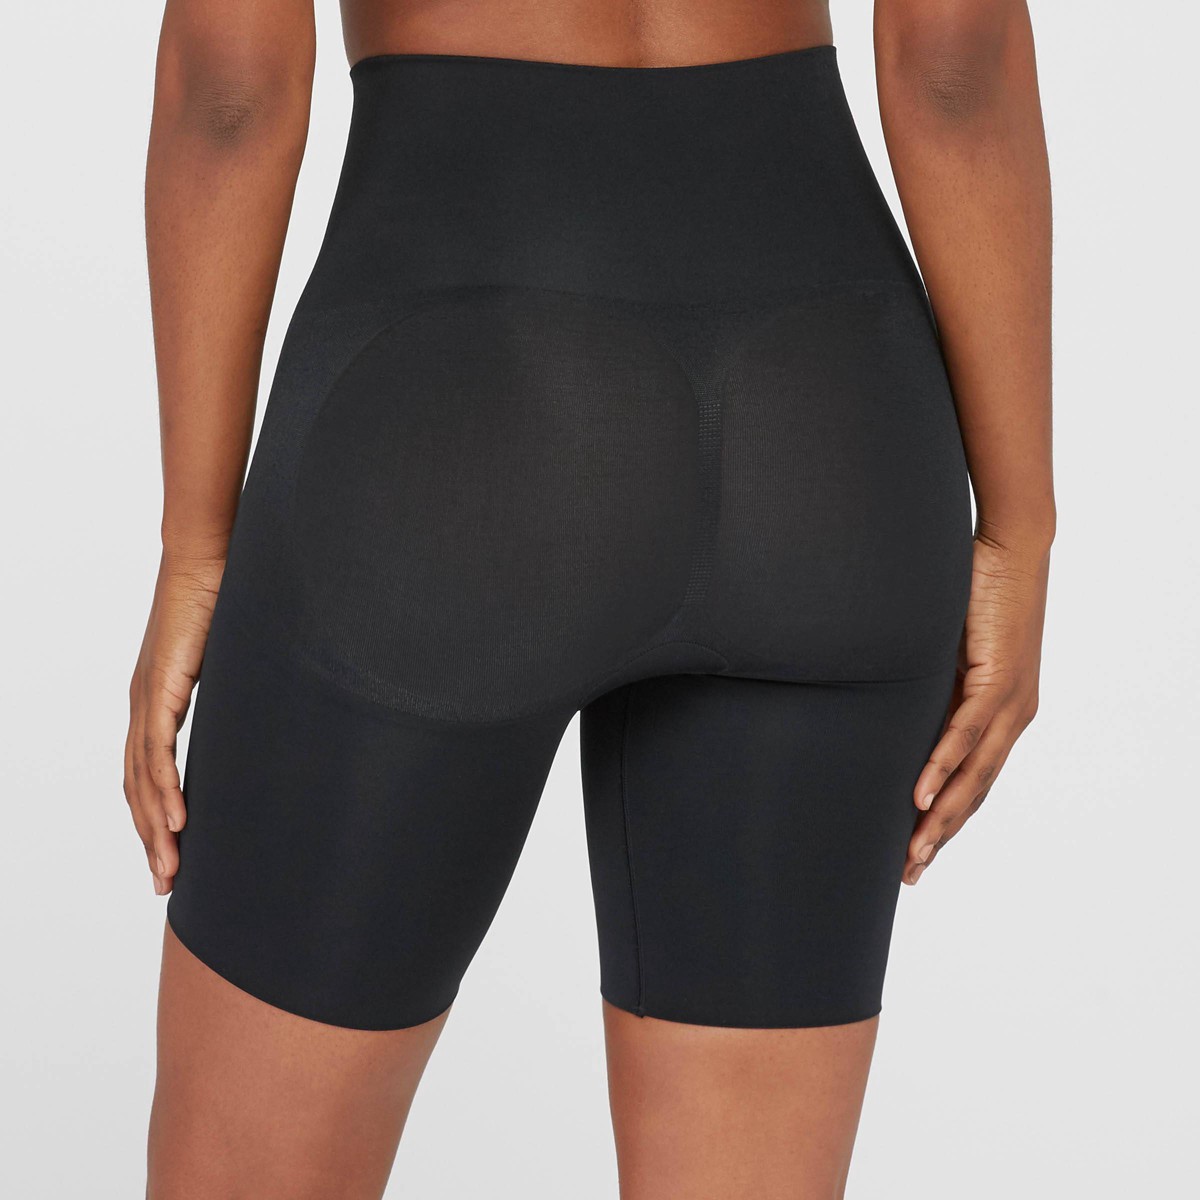 slide 2 of 3, ASSETS by SPANX Women's Remarkable Results Mid-Thigh Shaper - Black XL, 1 ct